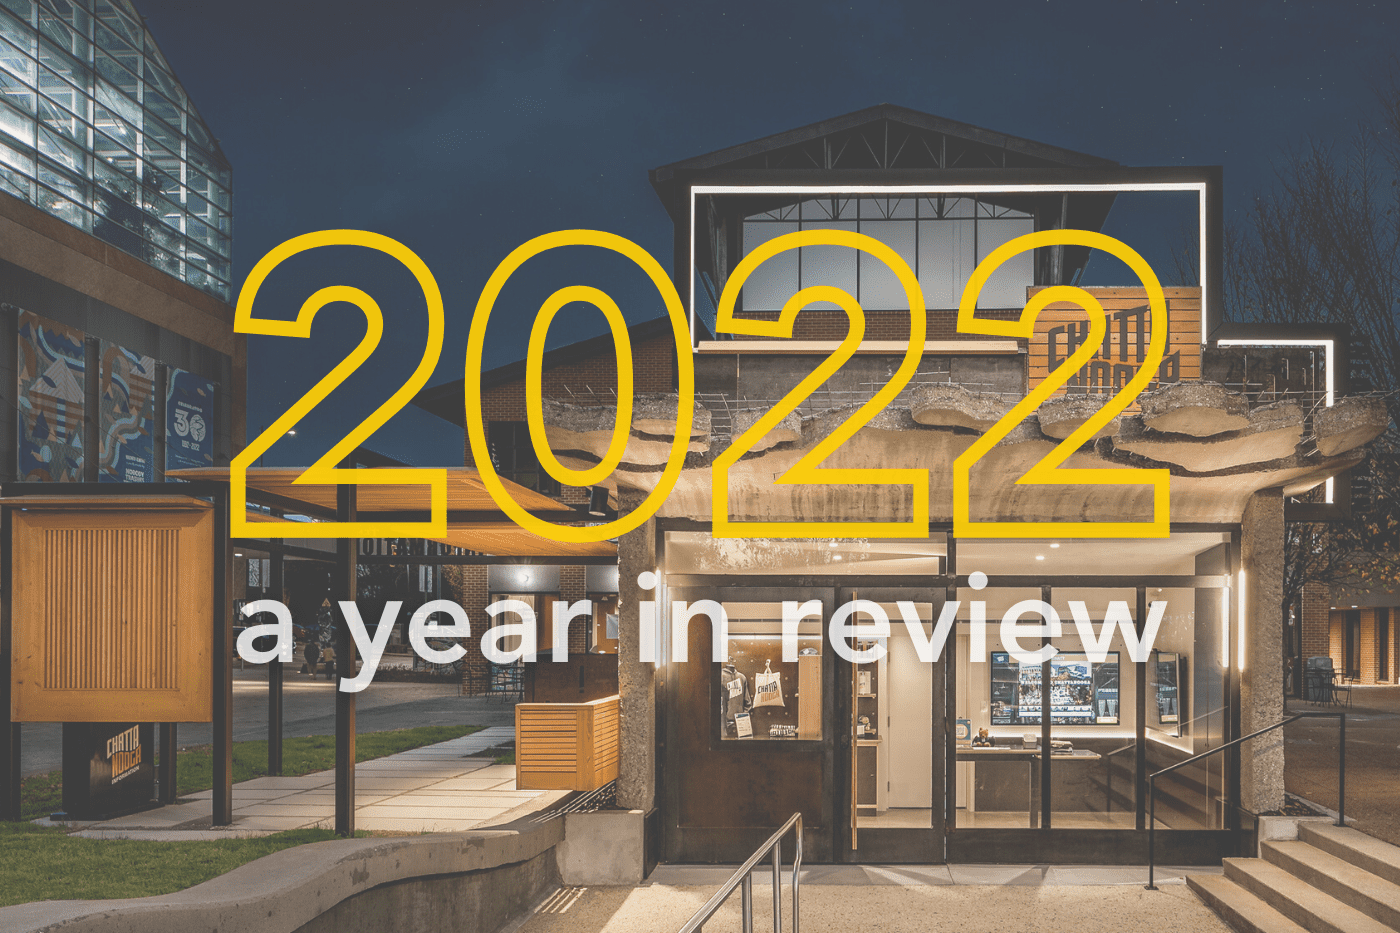 HK Architects 2022 year in review blog post cover